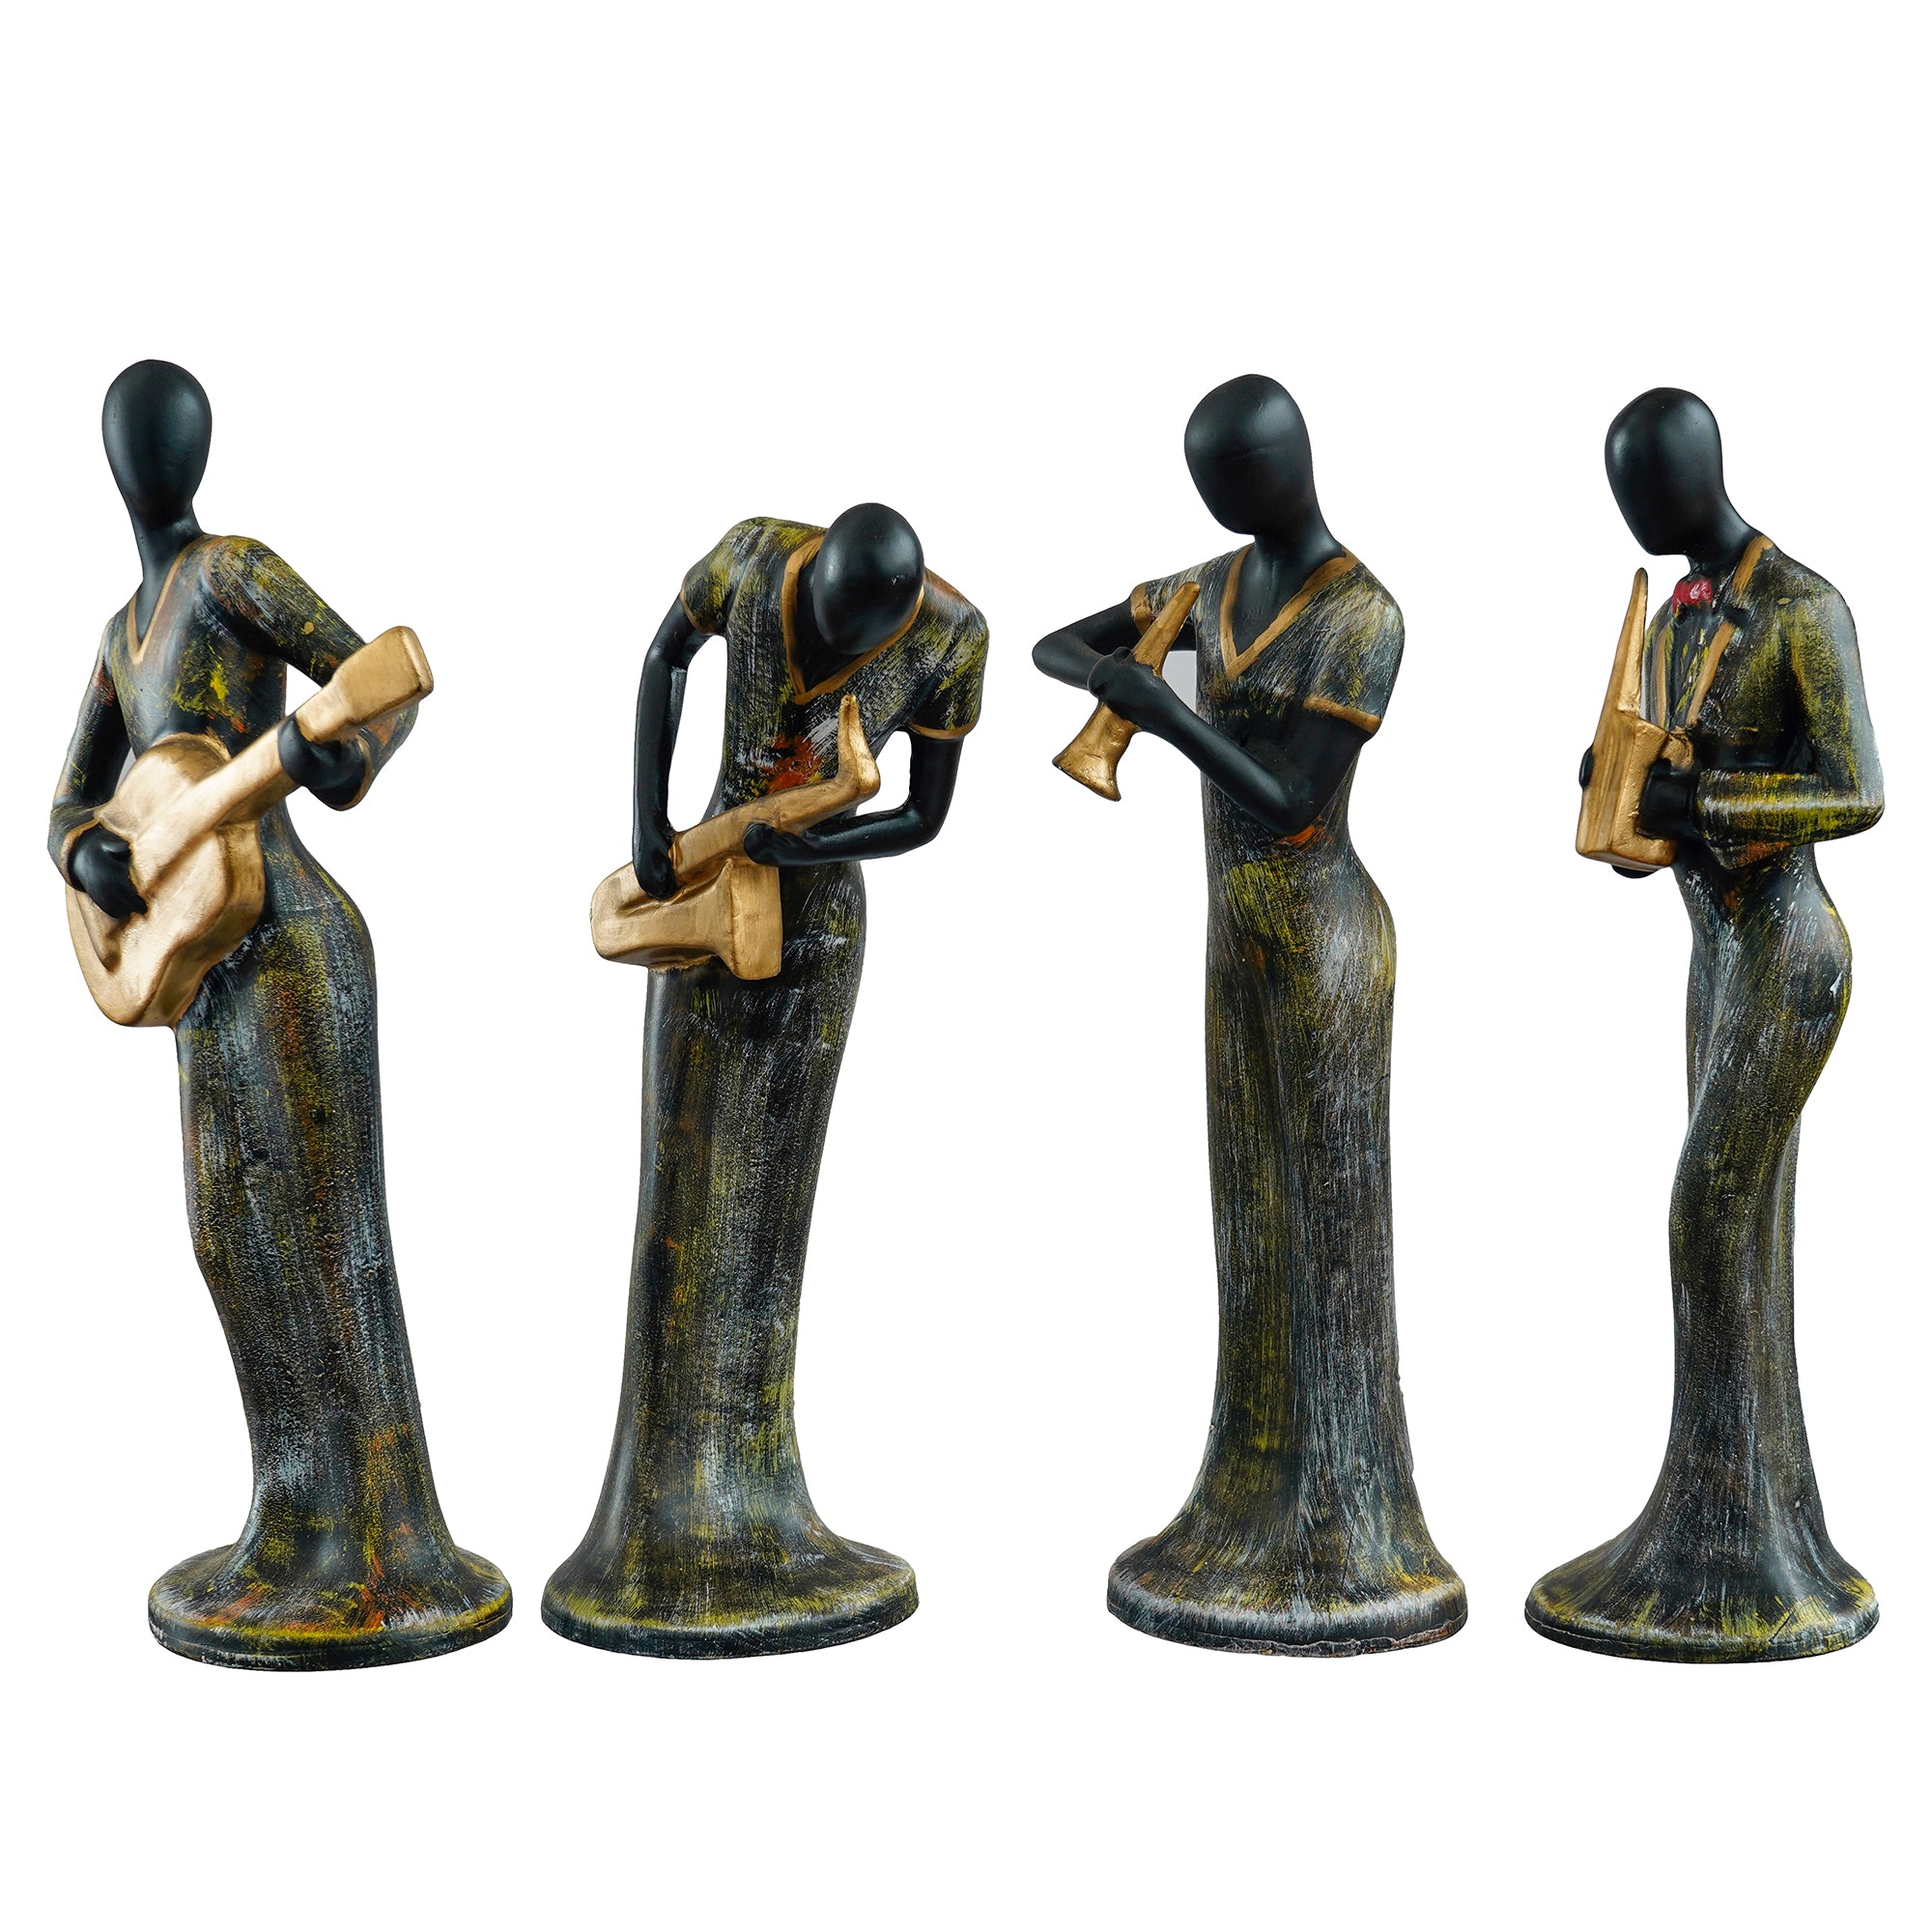 Grey and Black Polyresin Set of 4 Ladies figurines Playing Clarinet, Guitar, Wind, Saxophone Musical Instrument Handcrafted Decorative Showpiece 5